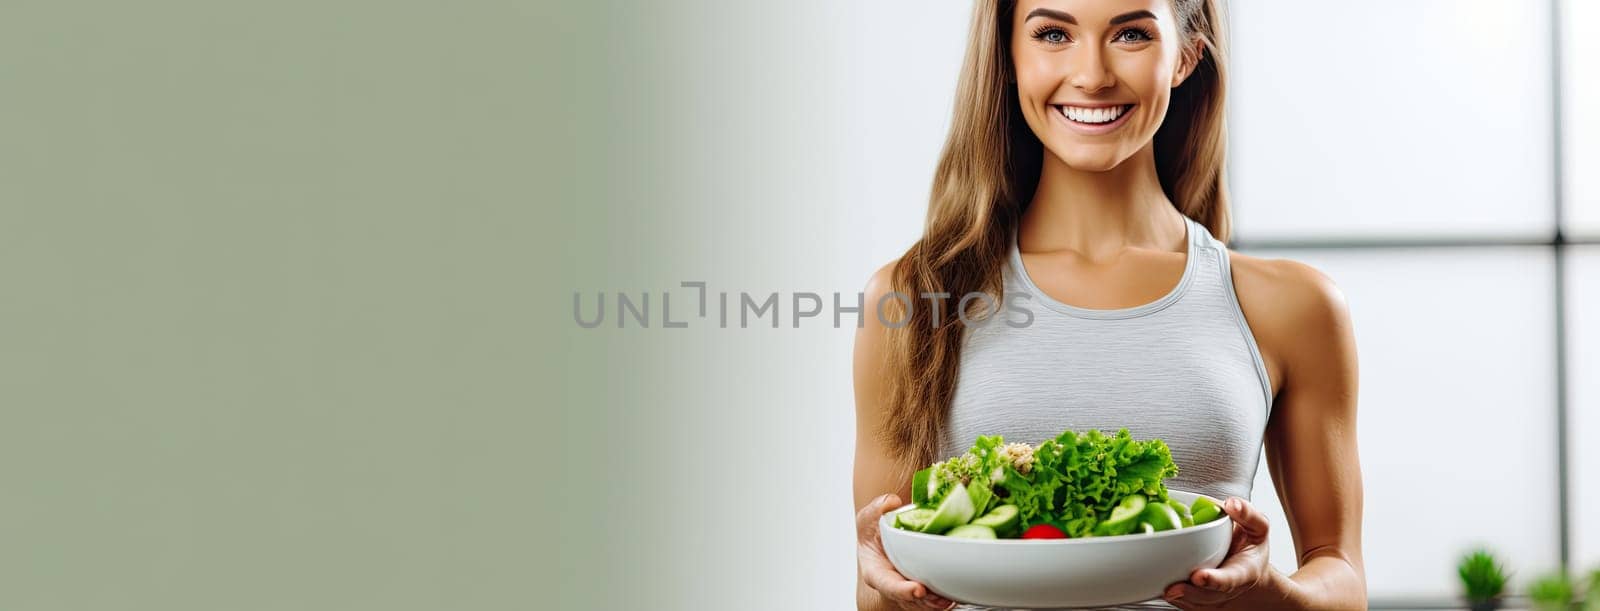 Advertising banner with sporty girl and fresh vegetables in bowl by Yurich32